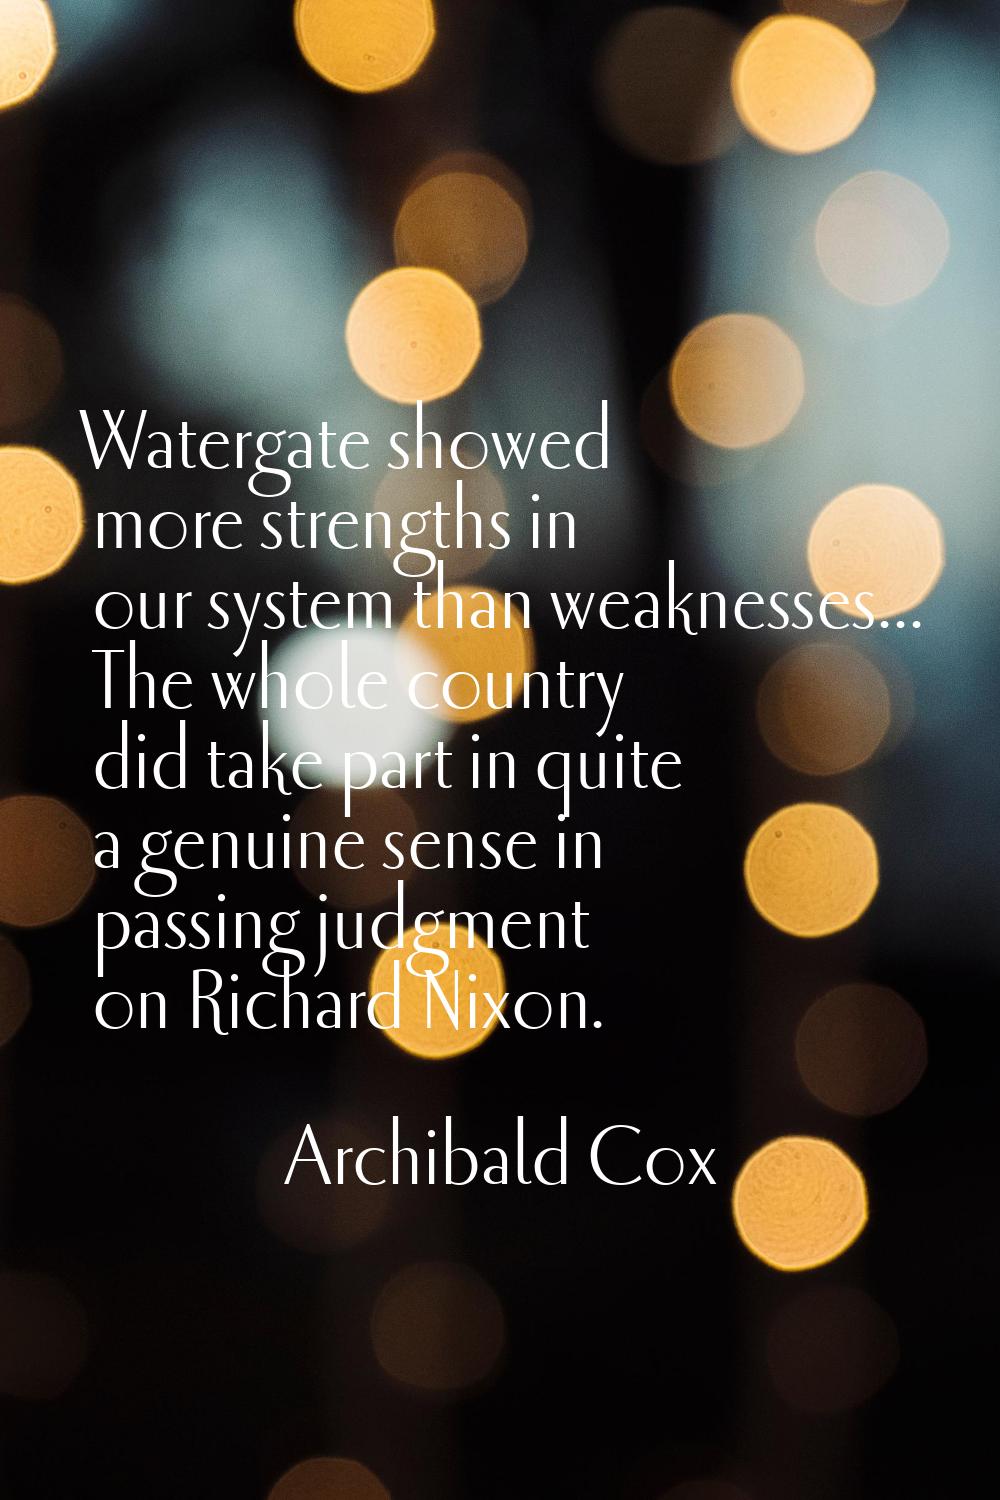 Watergate showed more strengths in our system than weaknesses... The whole country did take part in